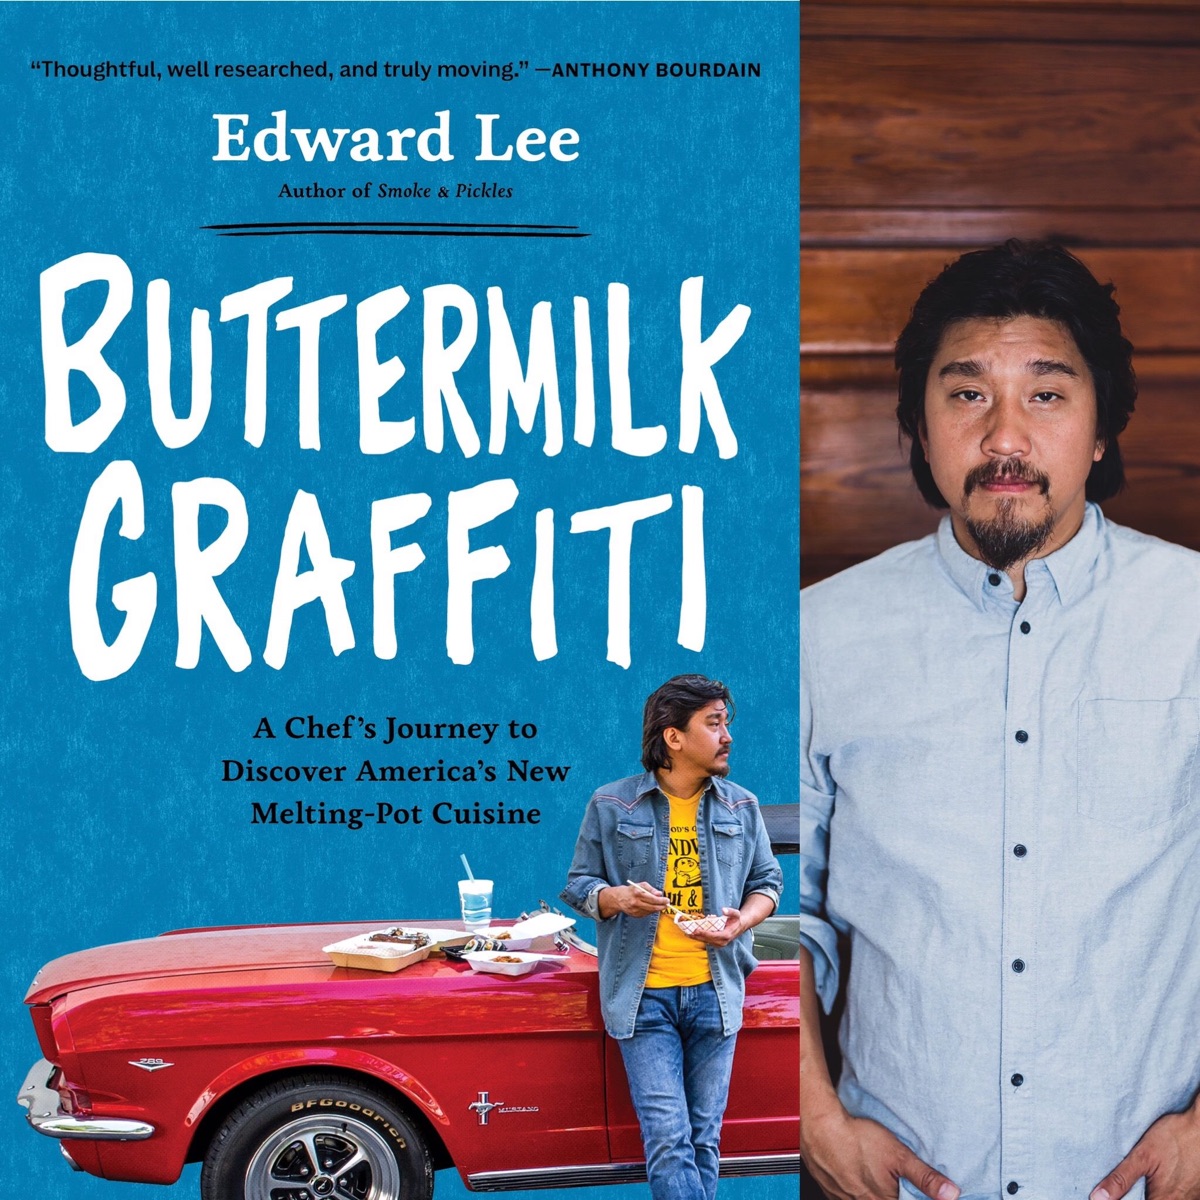 Chef Edward Lee Book Signing and Dinner | Edible Phoenix